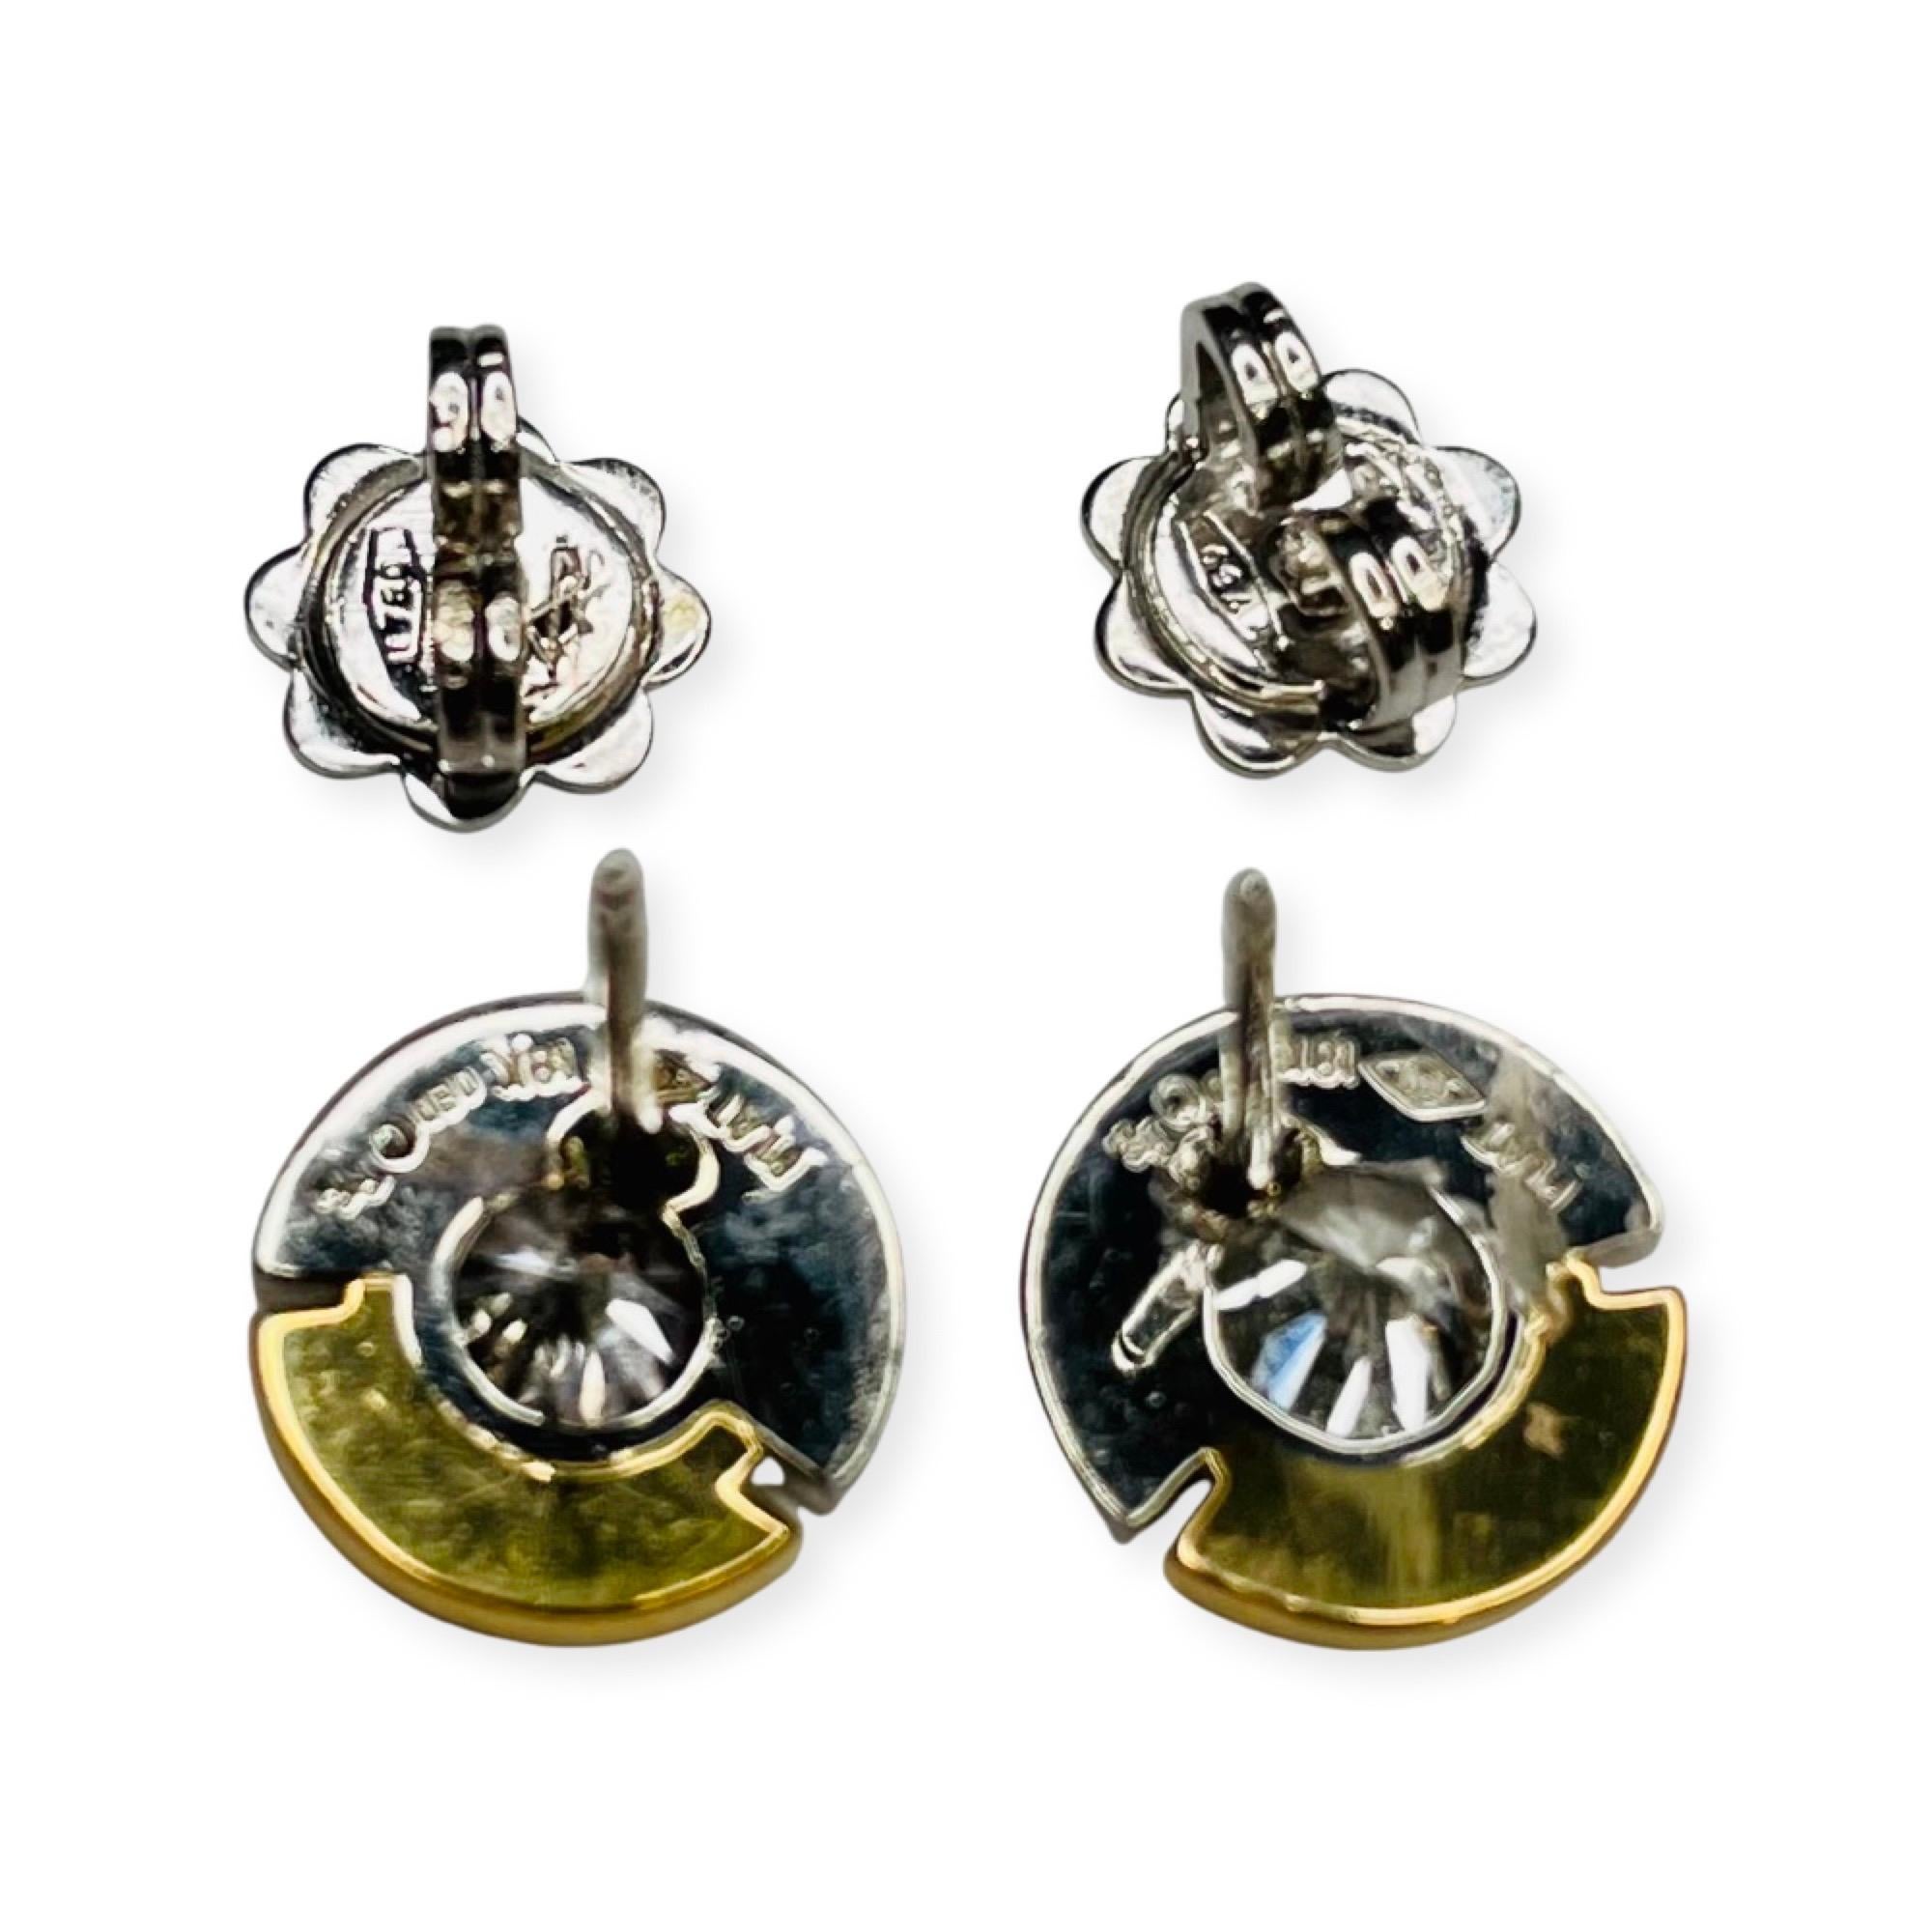 Rudolf Erdel Platinum and 18K Yellow Gold Diamond Earrings. The earrings are 9.5 mm in diameter. There are 2 diamonds for a total diamond weight of 0.80 carats. They are full cut round brilliant diamond of VS clarity and G color. They are bezel set.